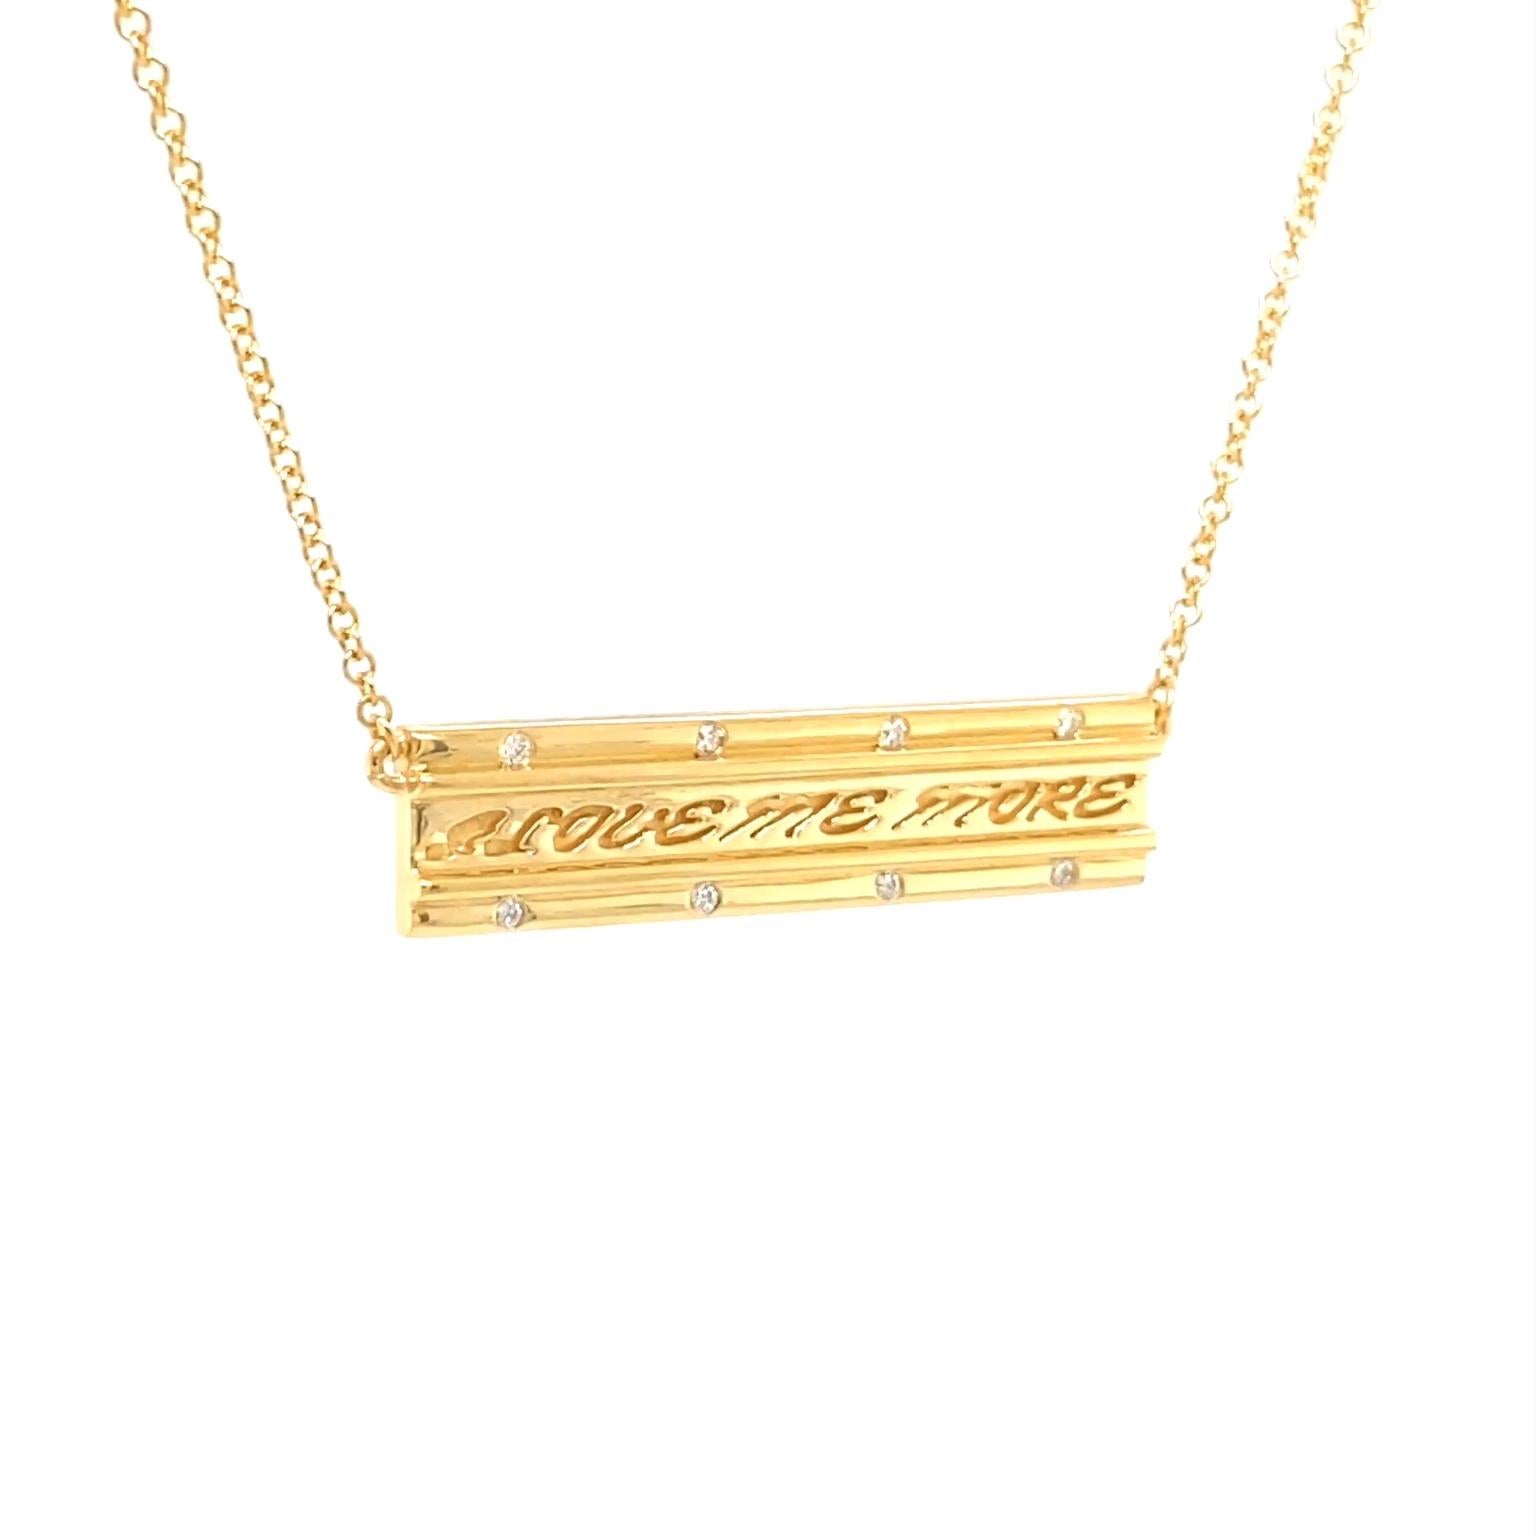 Diamonds highlight this pendant’s message. The body is made of 18k yellow gold shaped into an elongated bar. Wires edge the shape, while an engraved 'I love me more' fills the center. Round brilliant cut diamonds embedded in the gold add flashes of